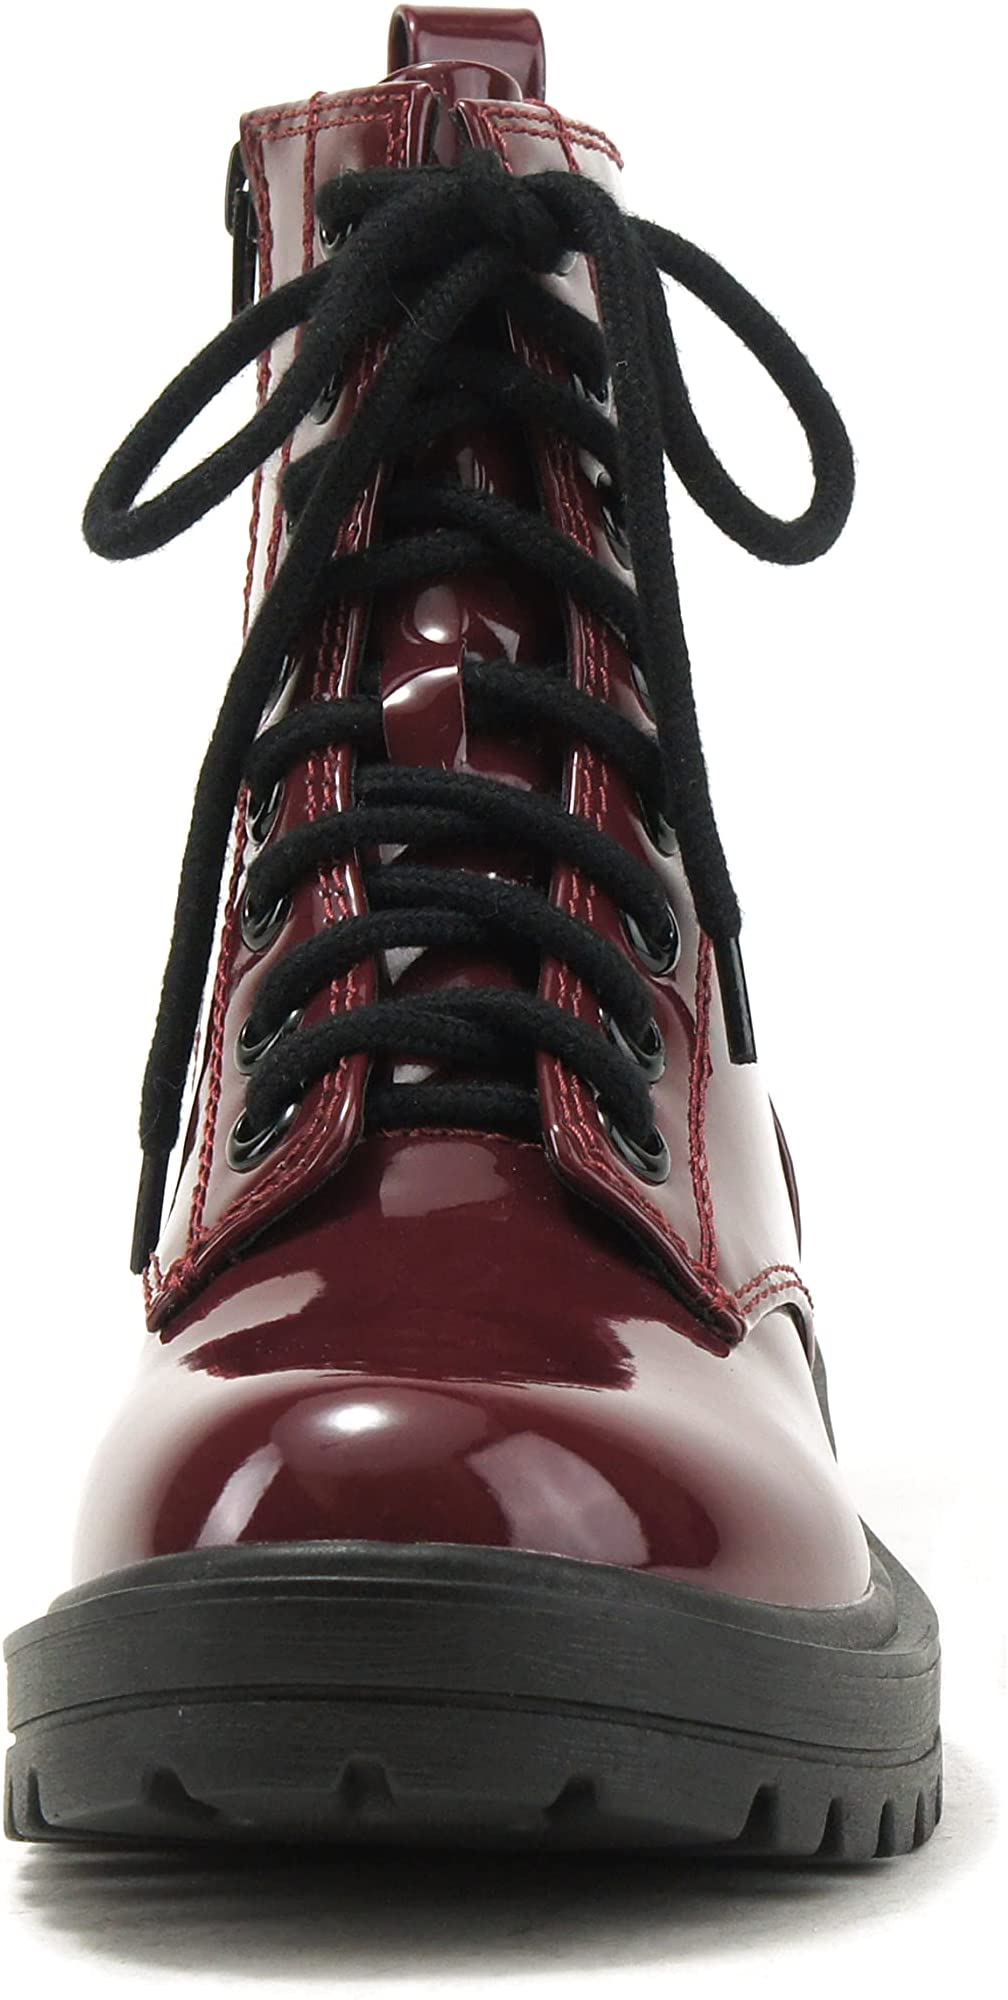 Soda Women Combat Army Military Motorcycle Riding Platform Lug Boots Side Zipper FIRM-S Vino Wine Burgundy Patent 10 - image 3 of 4